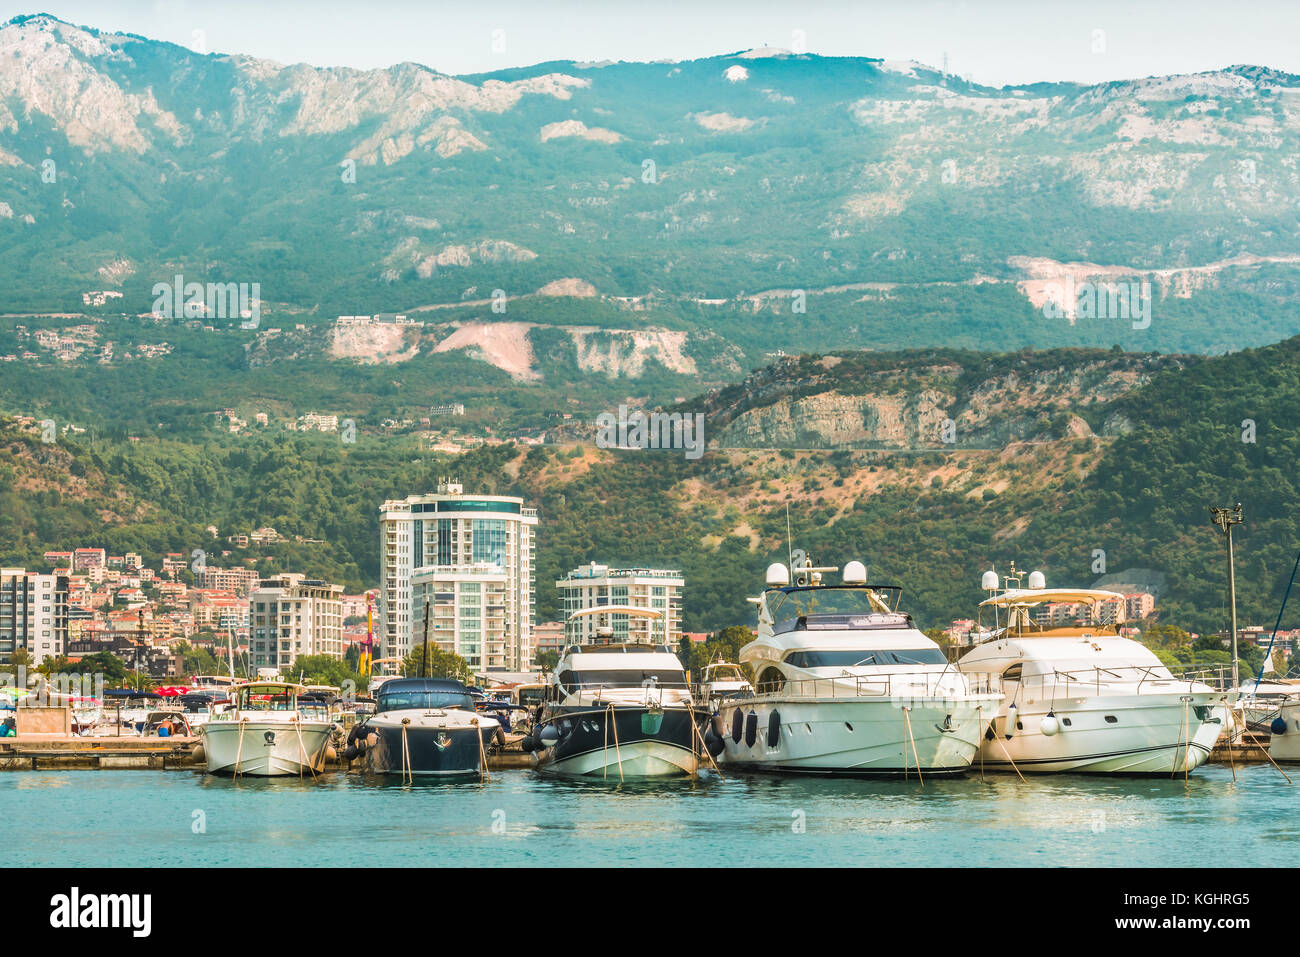 Marina for sailing yachts and boats with a view of the city of Budva and the Balkan Mountains, Budva Riviera, Montenegro. Stock Photo